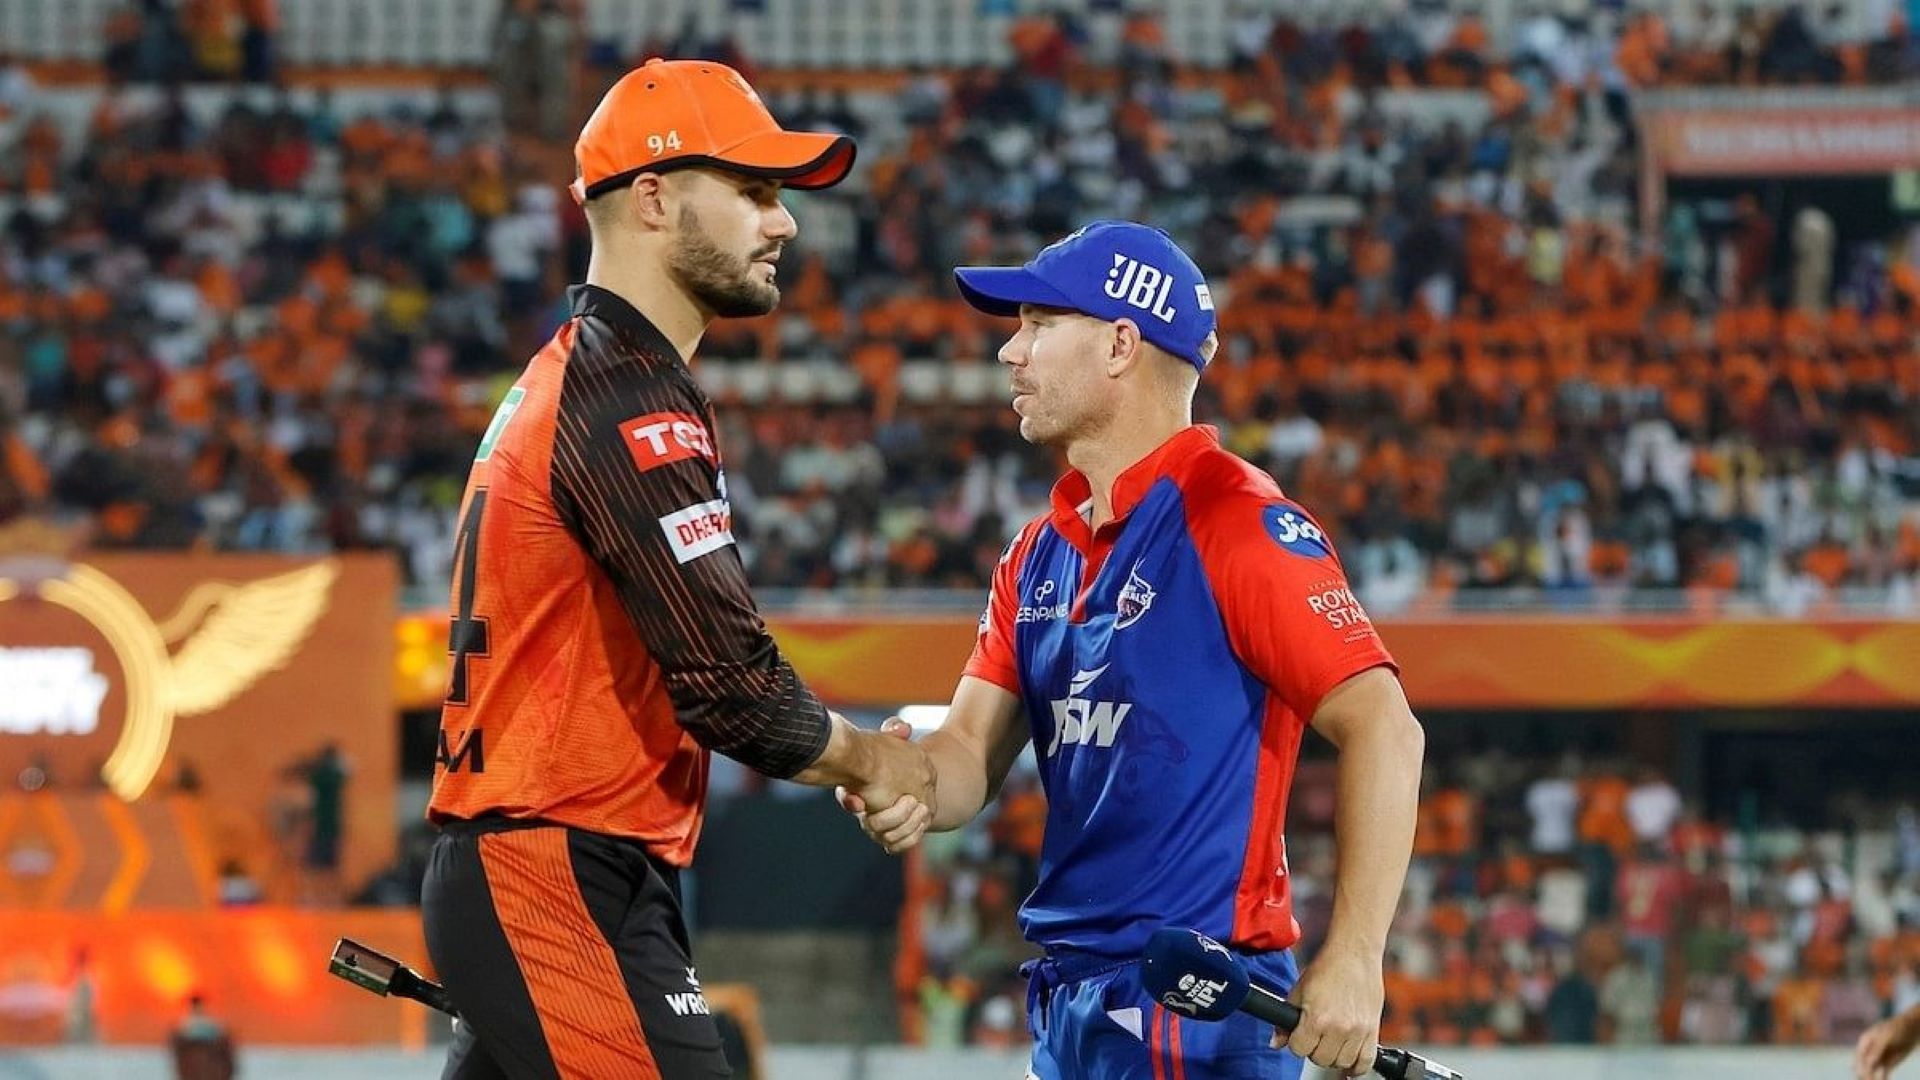 Both SRH and DC have endured a miserable first half of the season